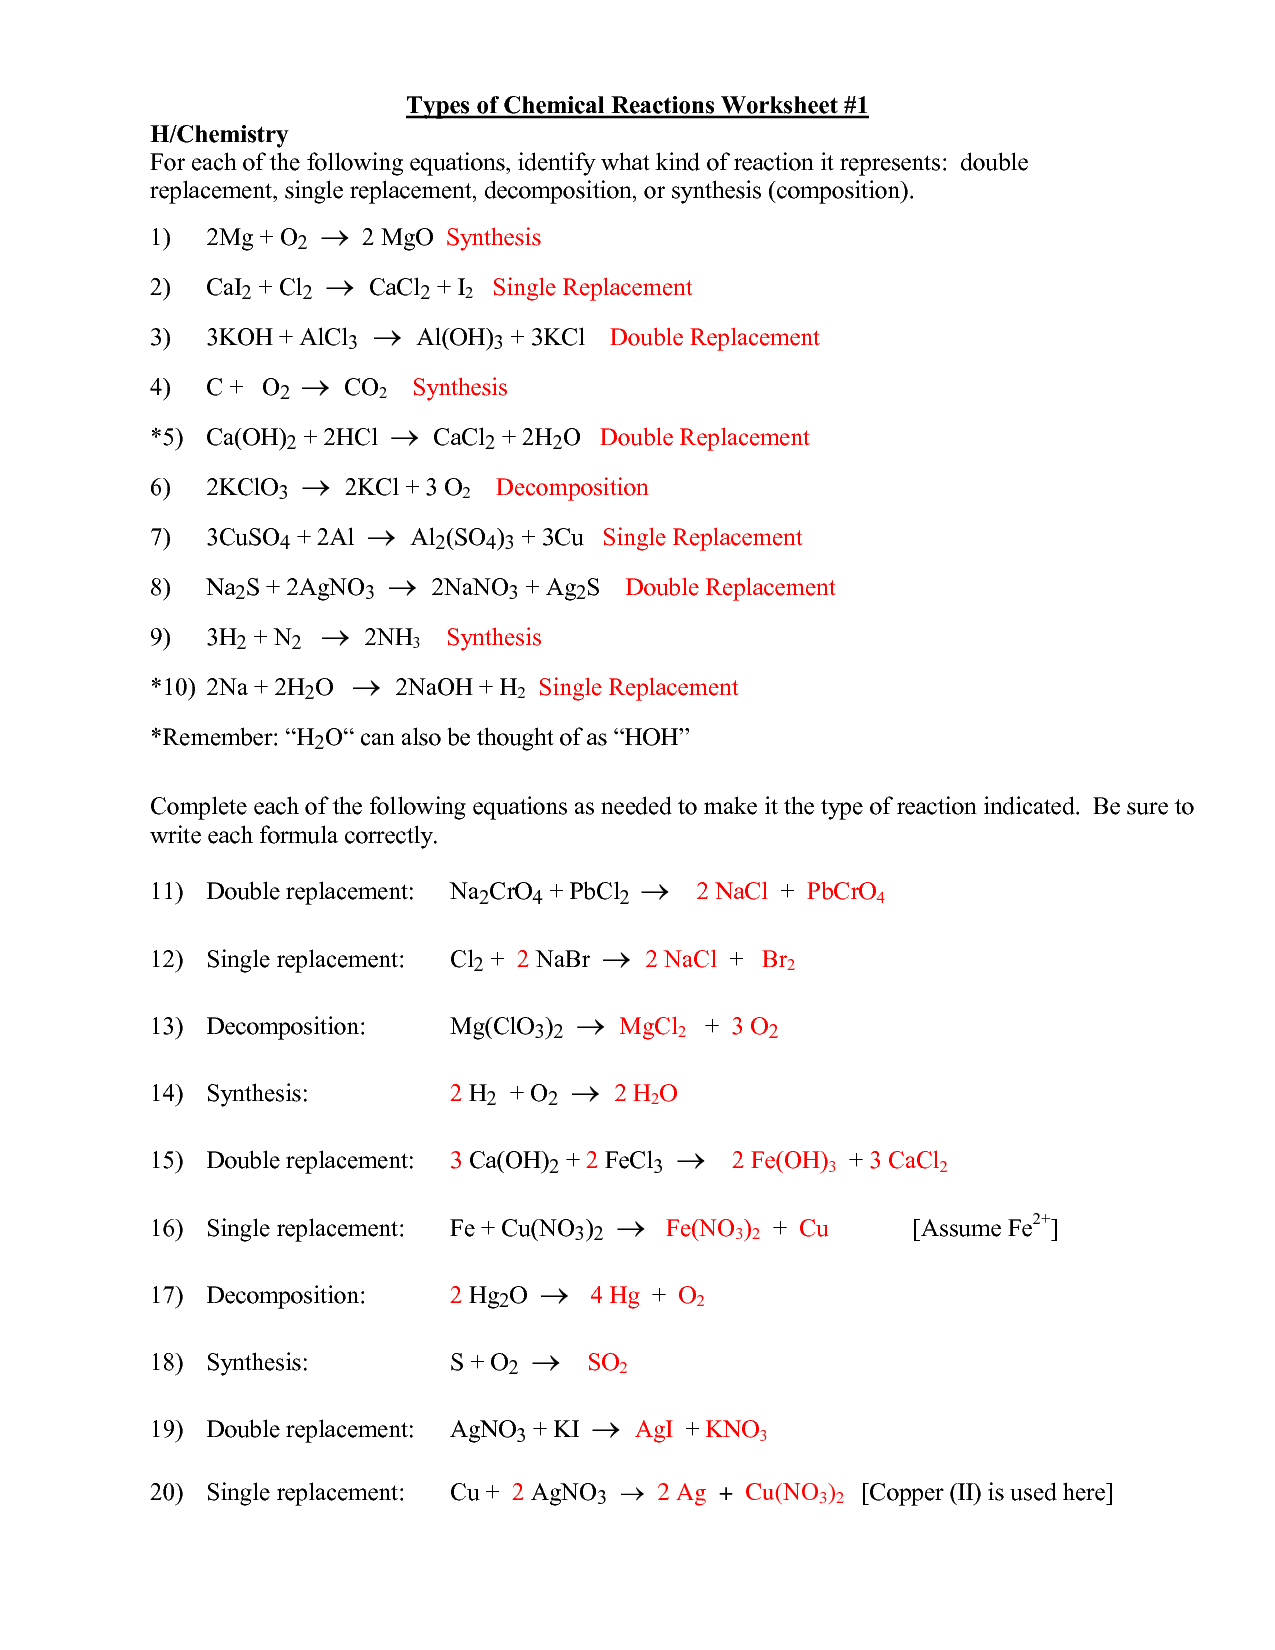 types-of-chemical-reactions-worksheets-answer-key